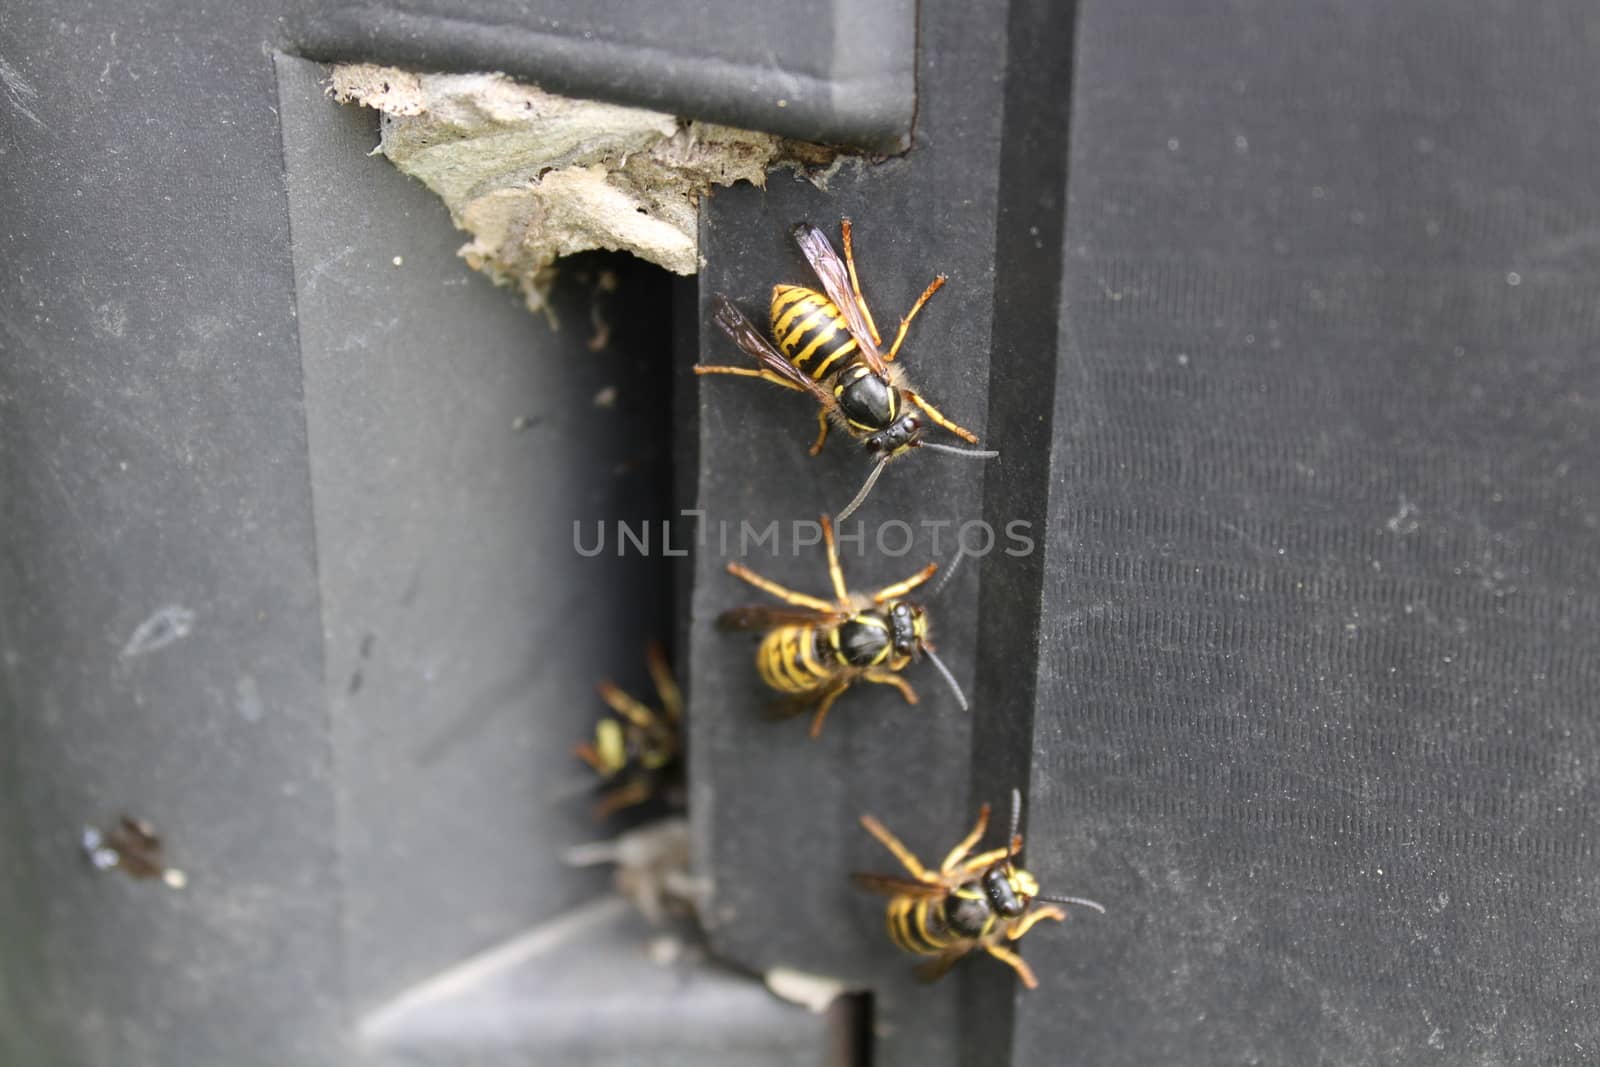 The picture shows wasps on the composter